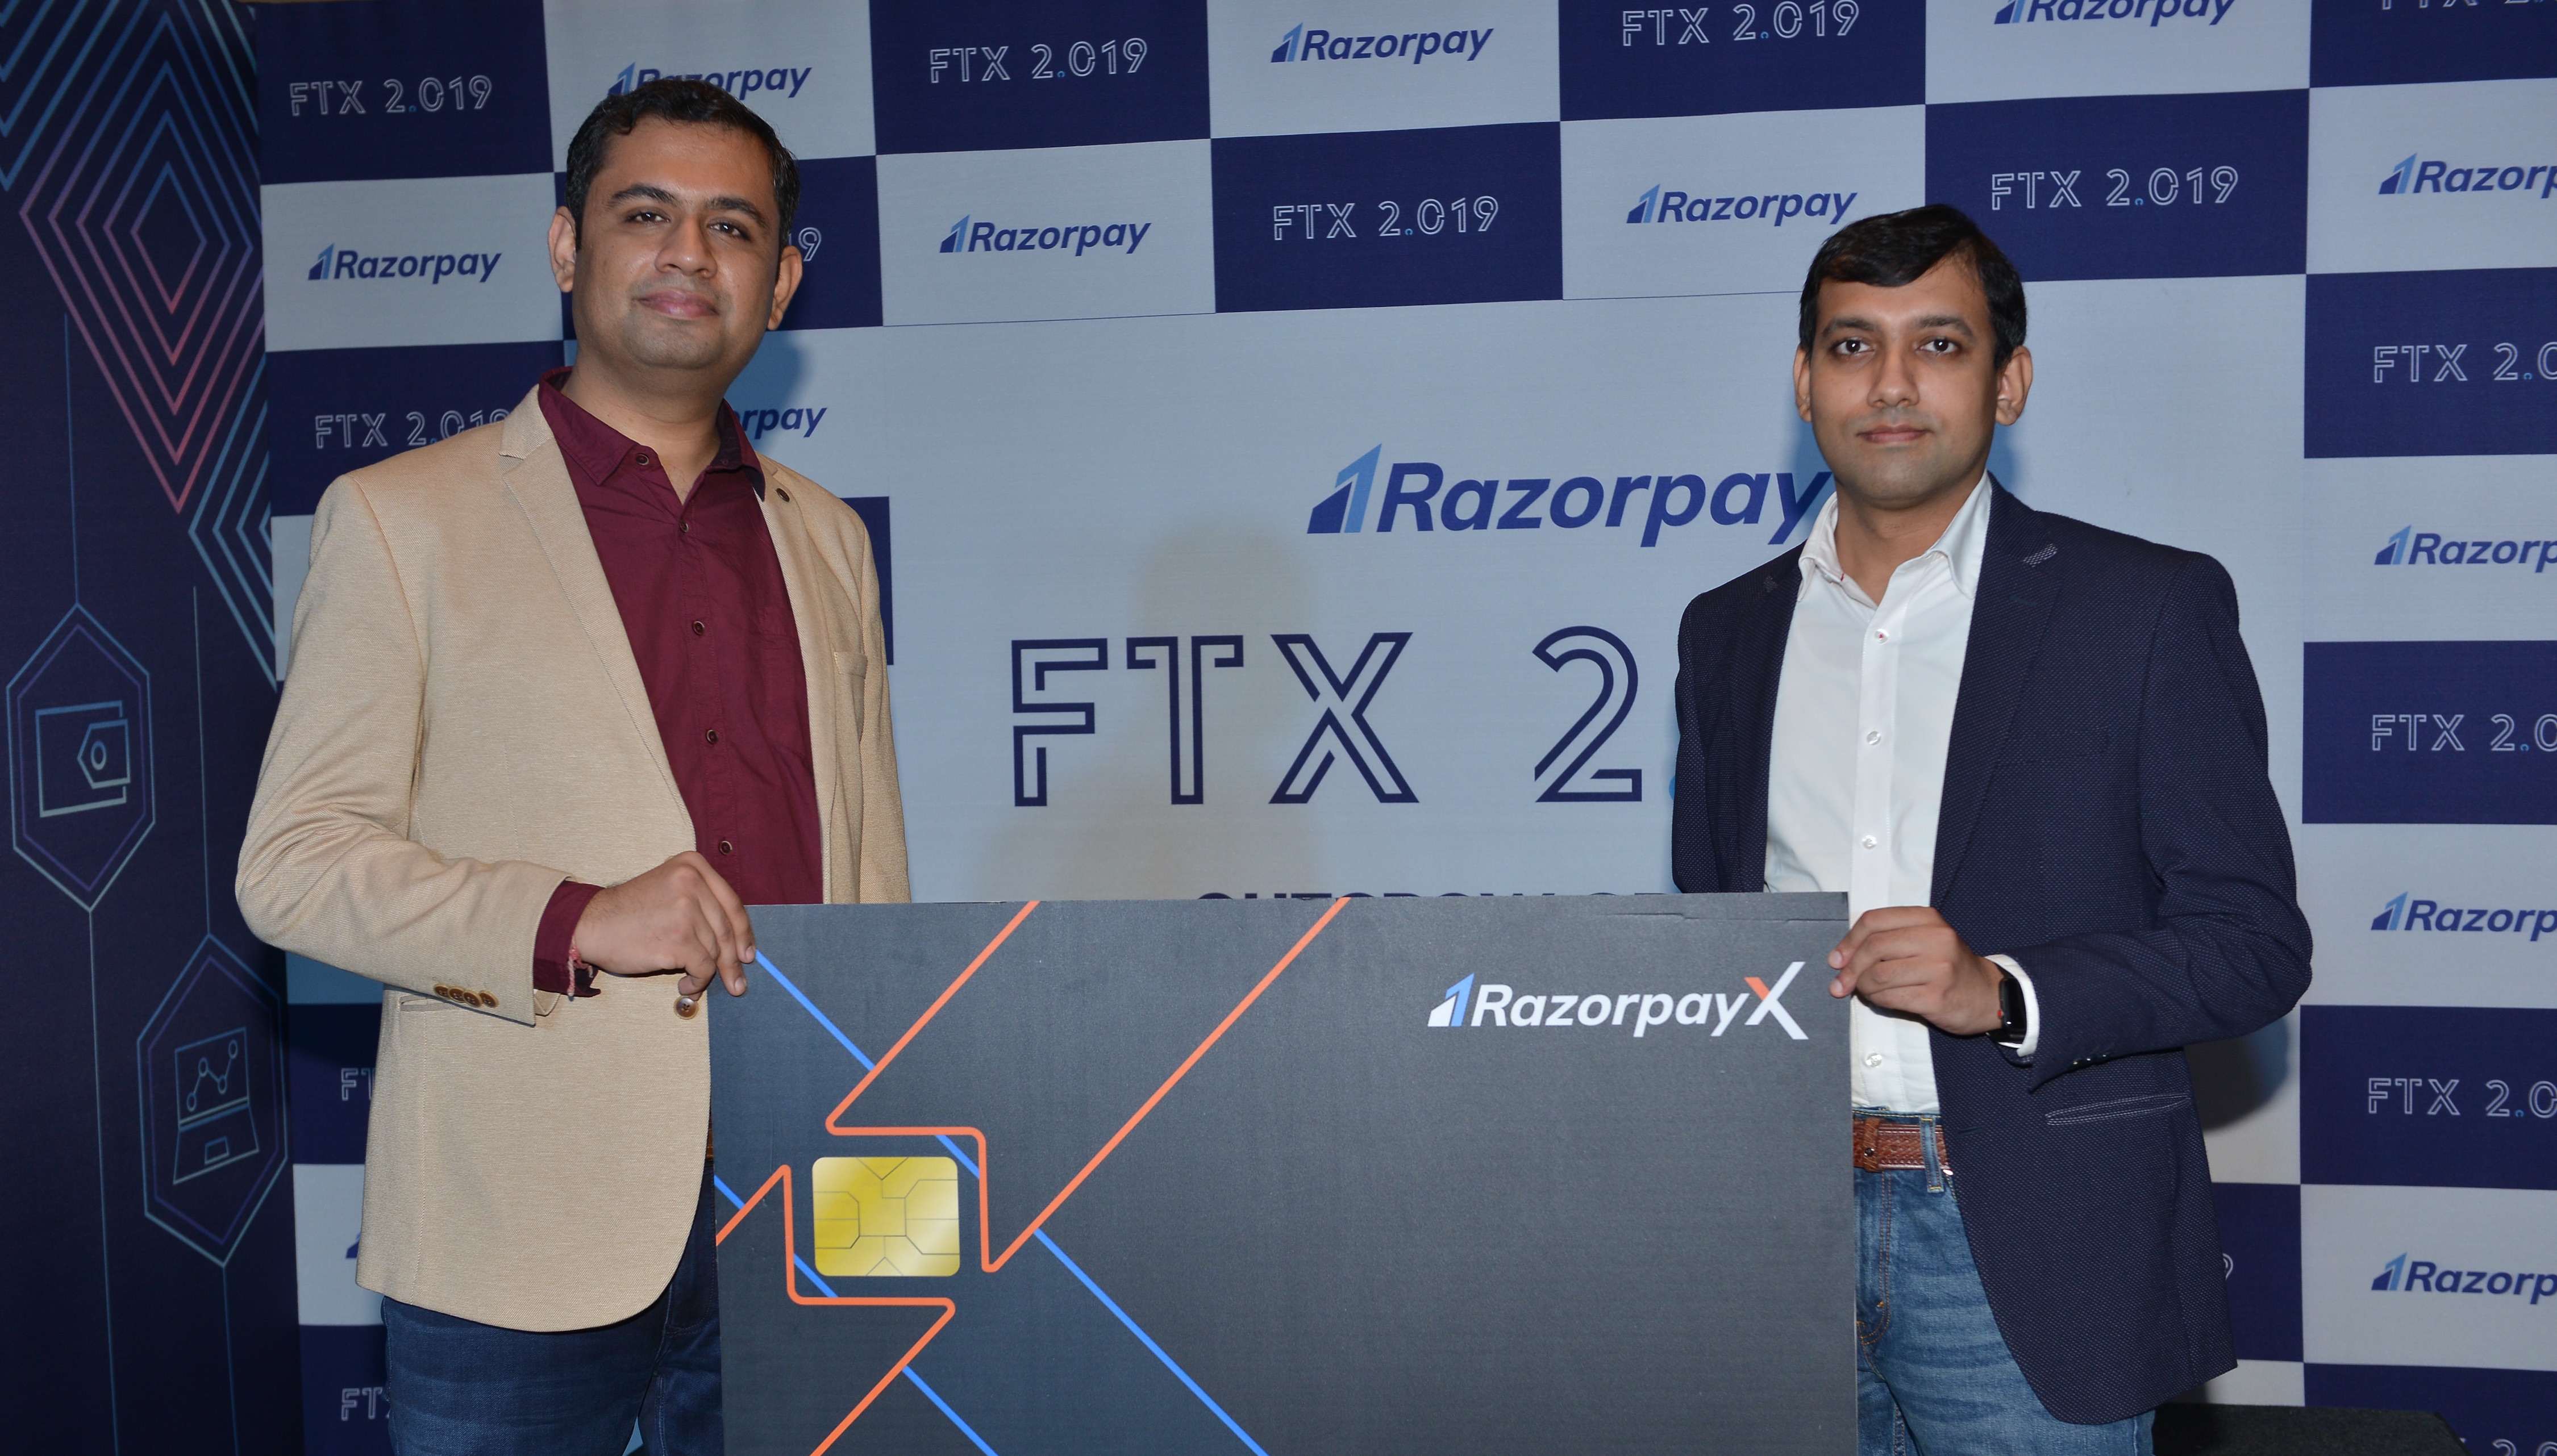 india's razorpay becomes unicorn after new $100 million funding round | techcrunch